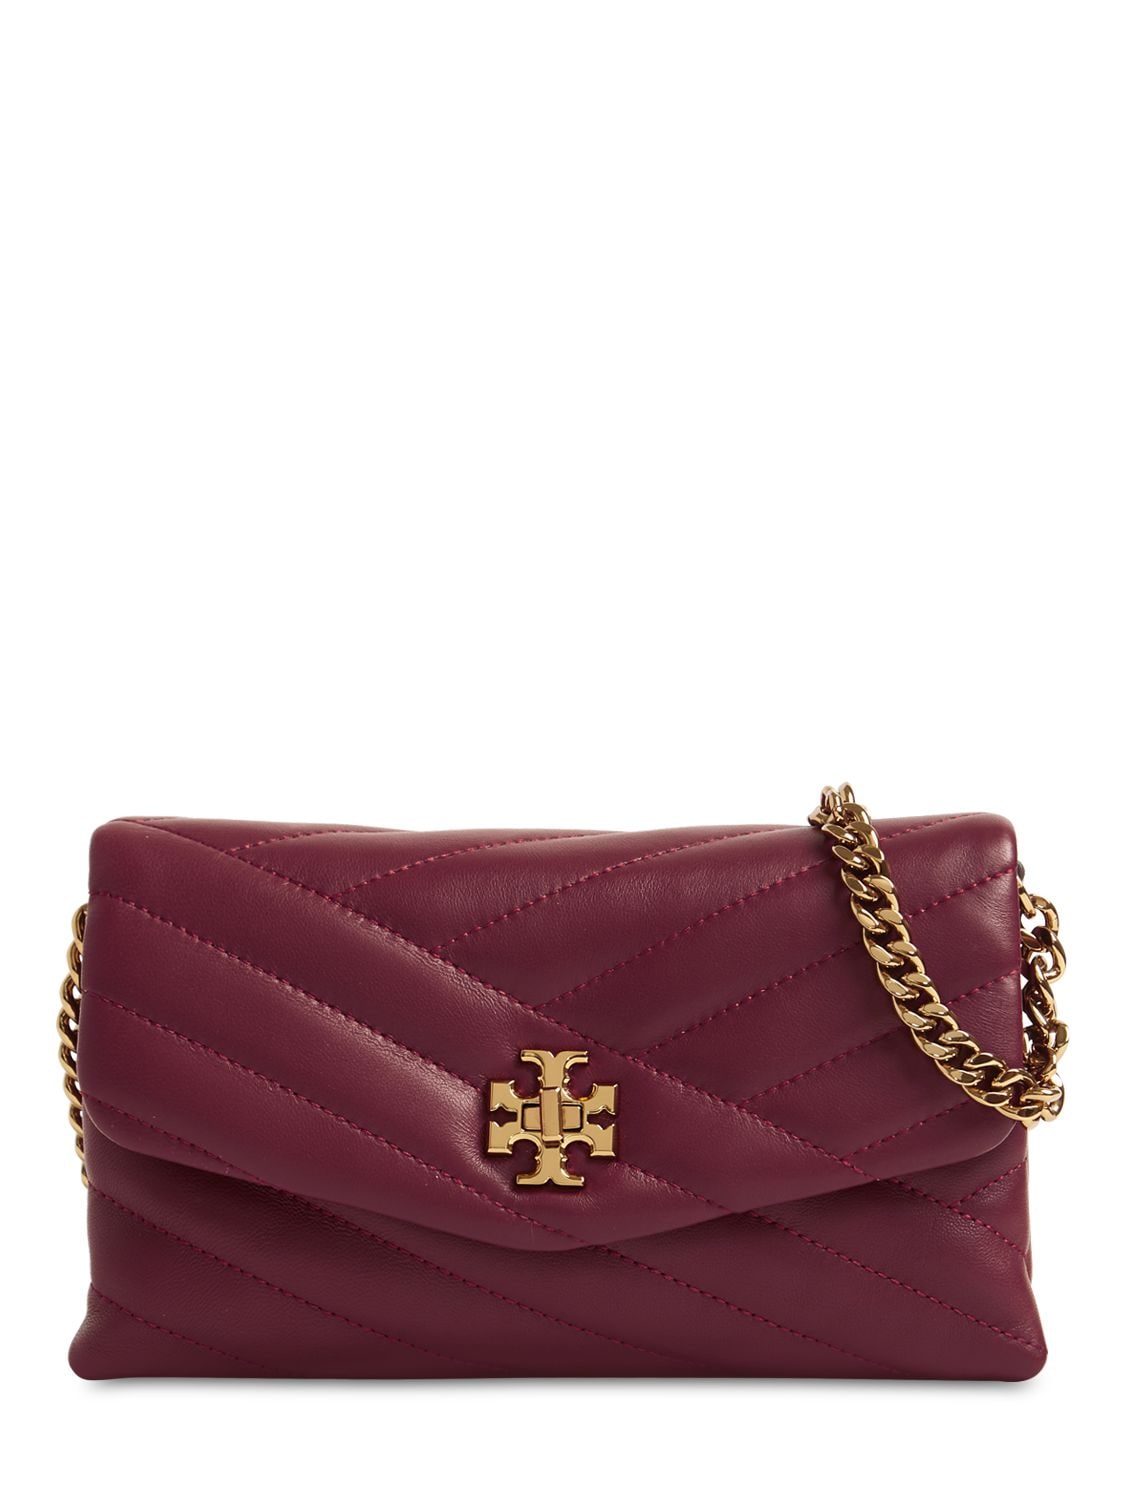 Tory Burch Kira Quilted Leather Chain Wallet Bag In Bordeaux